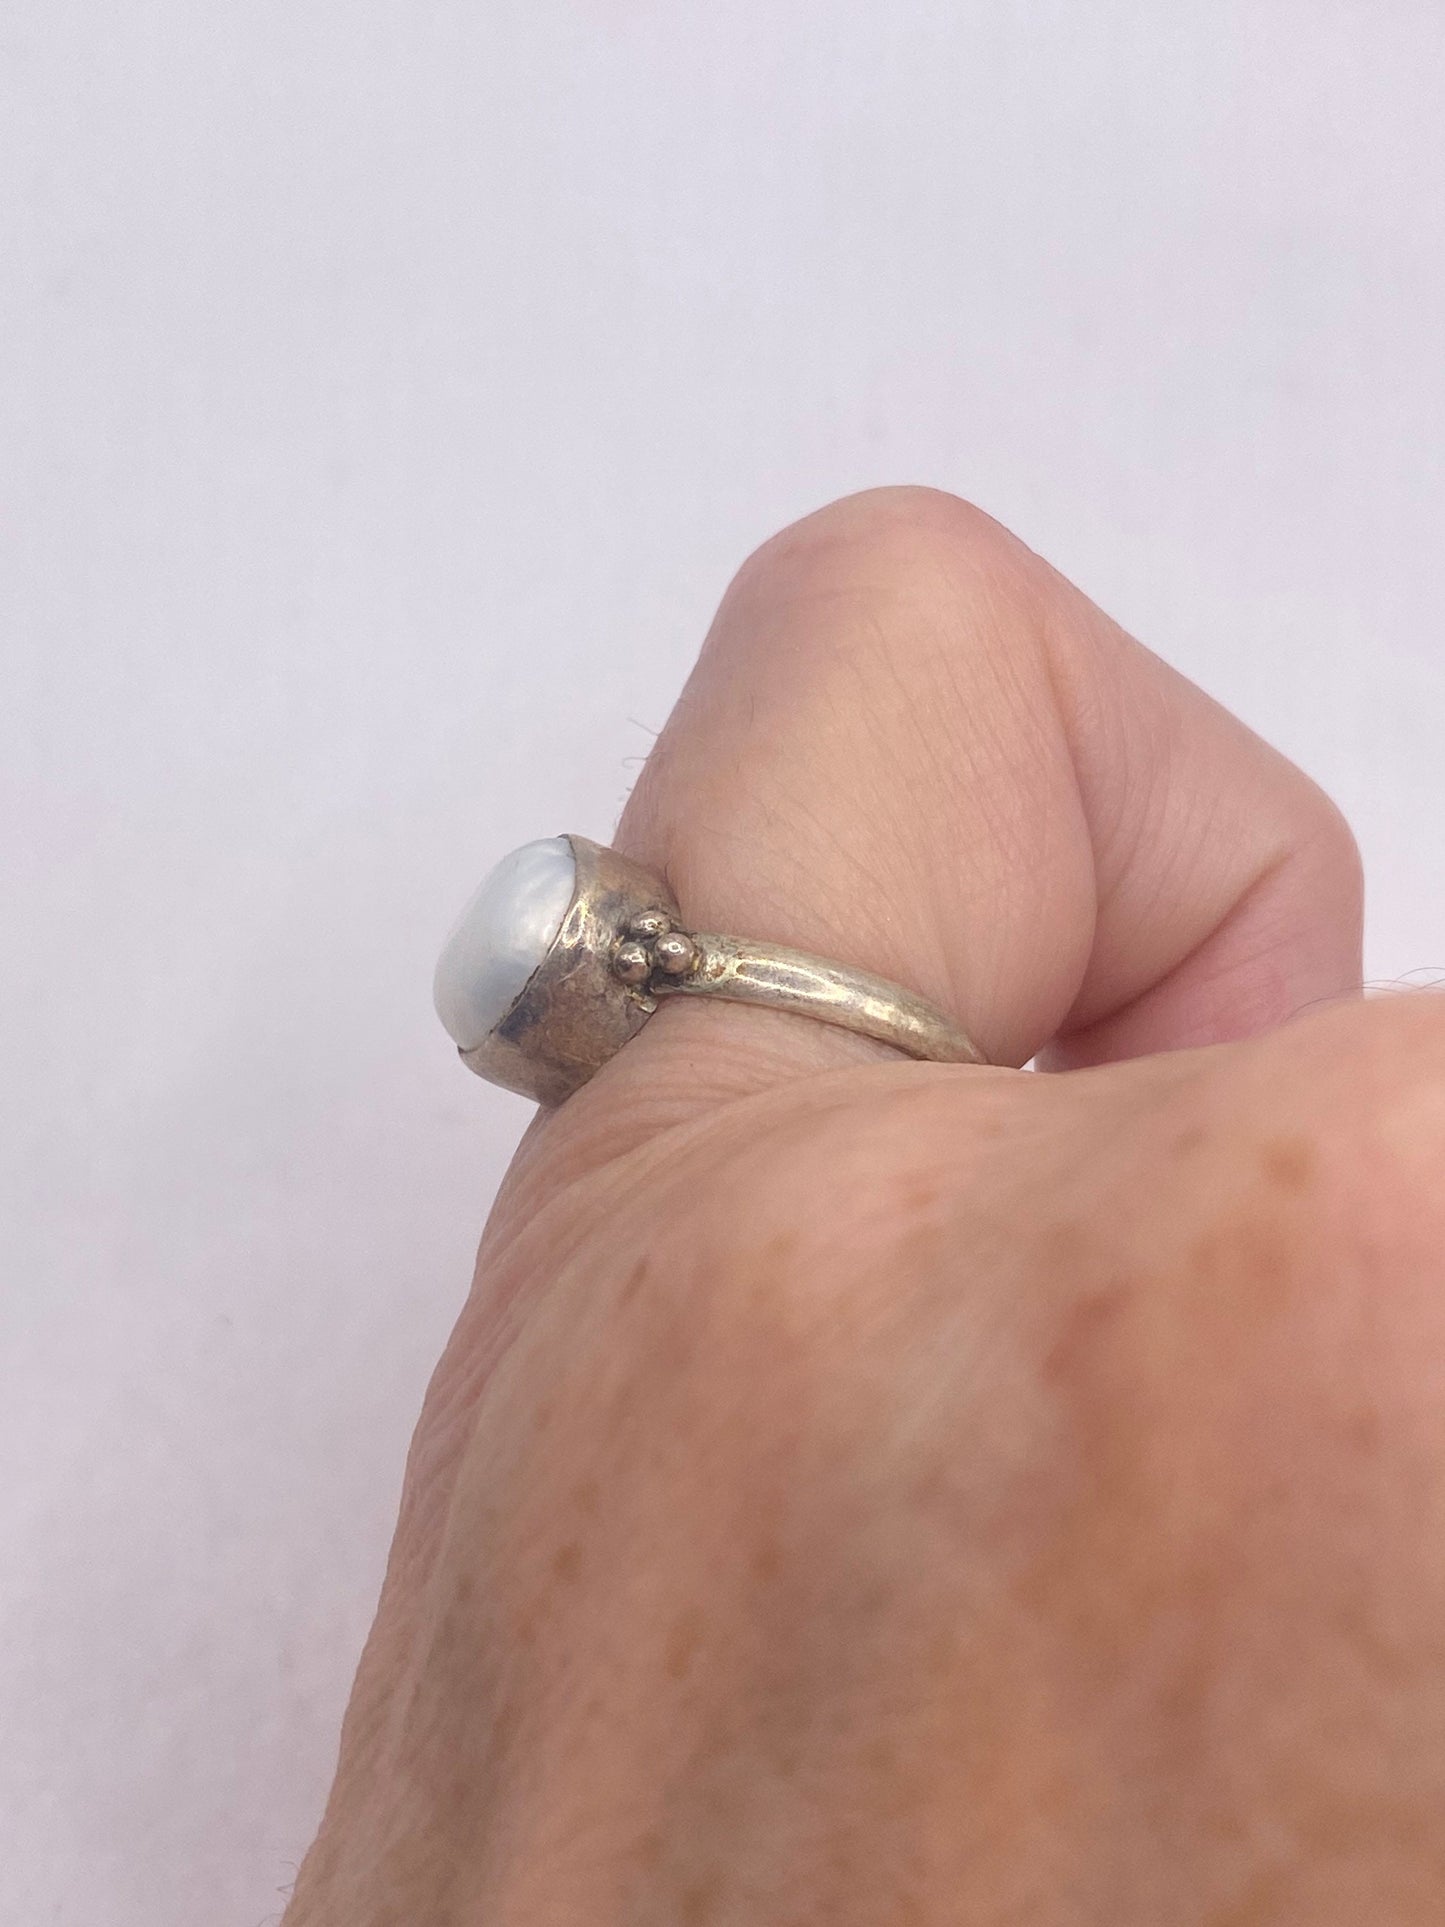 Vintage White Genuine Pearl Silver Cocktail Ring